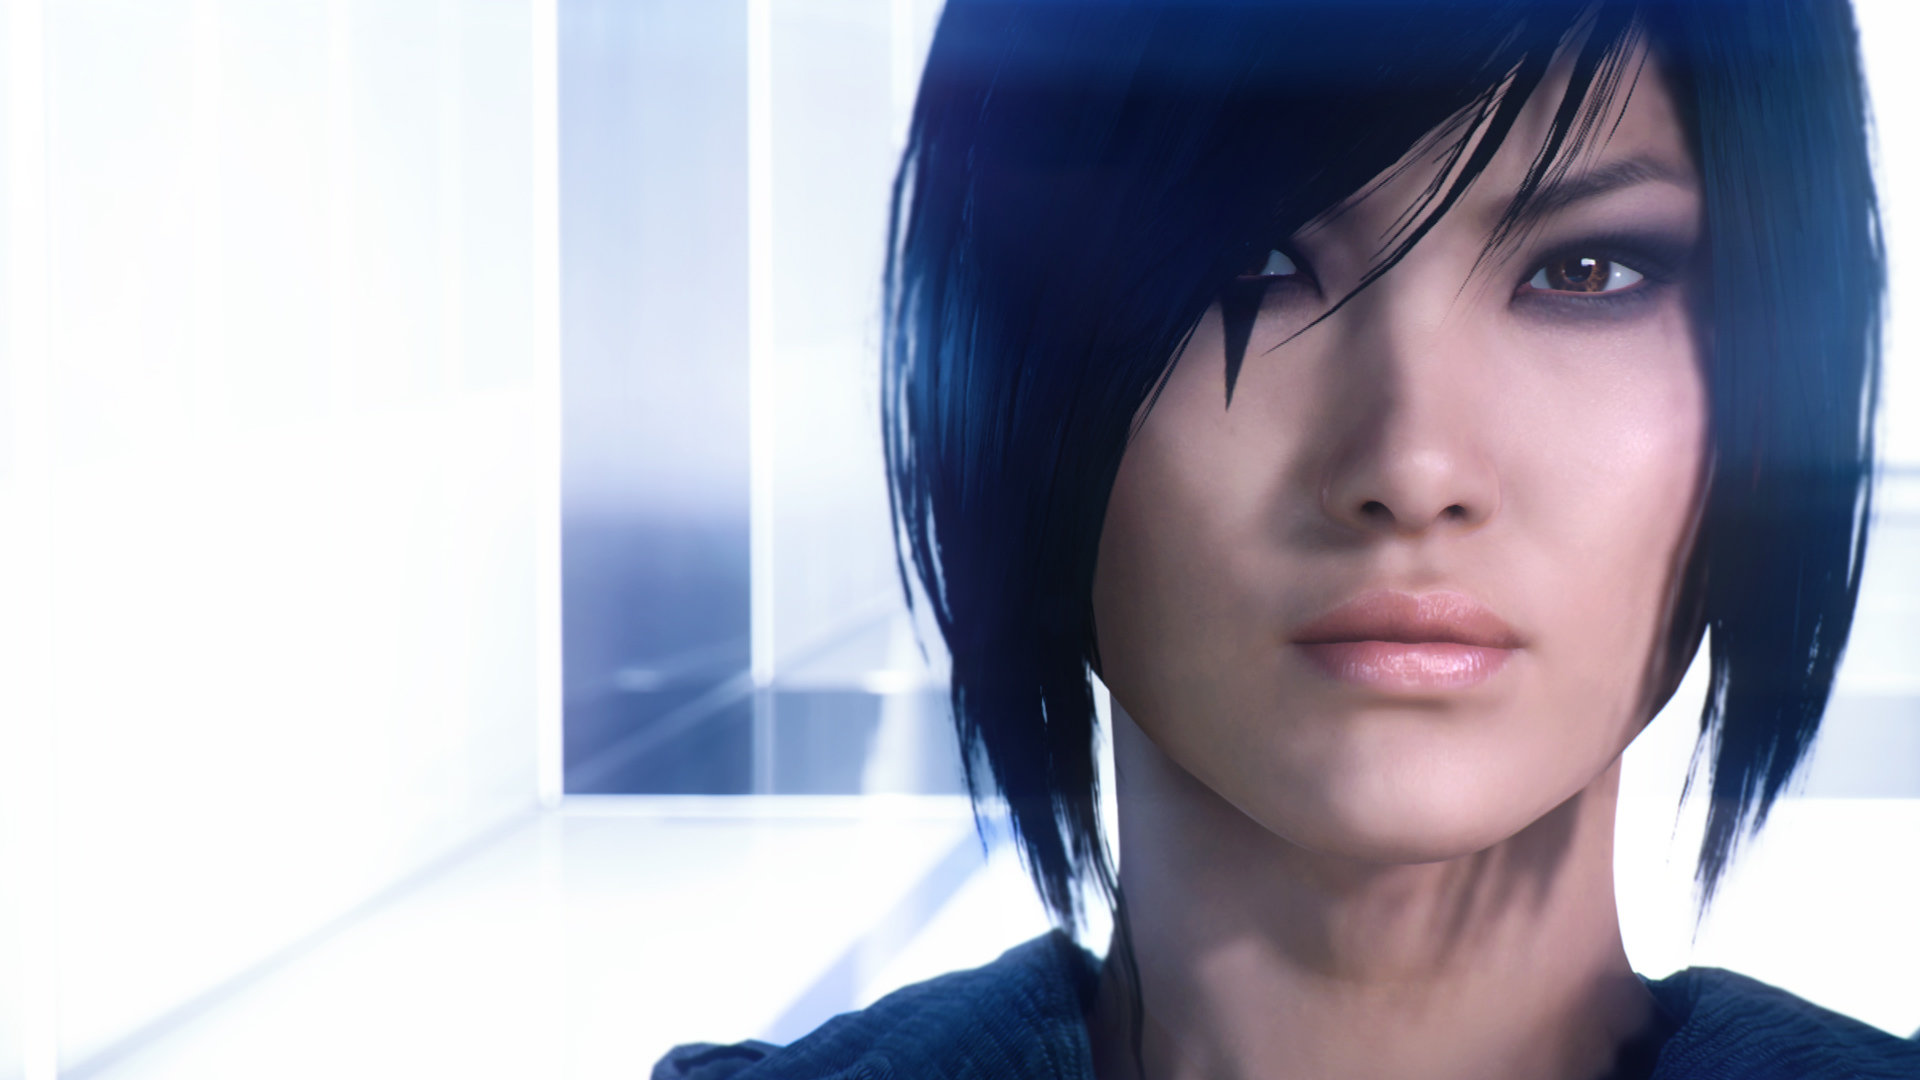 Check out the Mirror's Edge Catalyst launch trailer